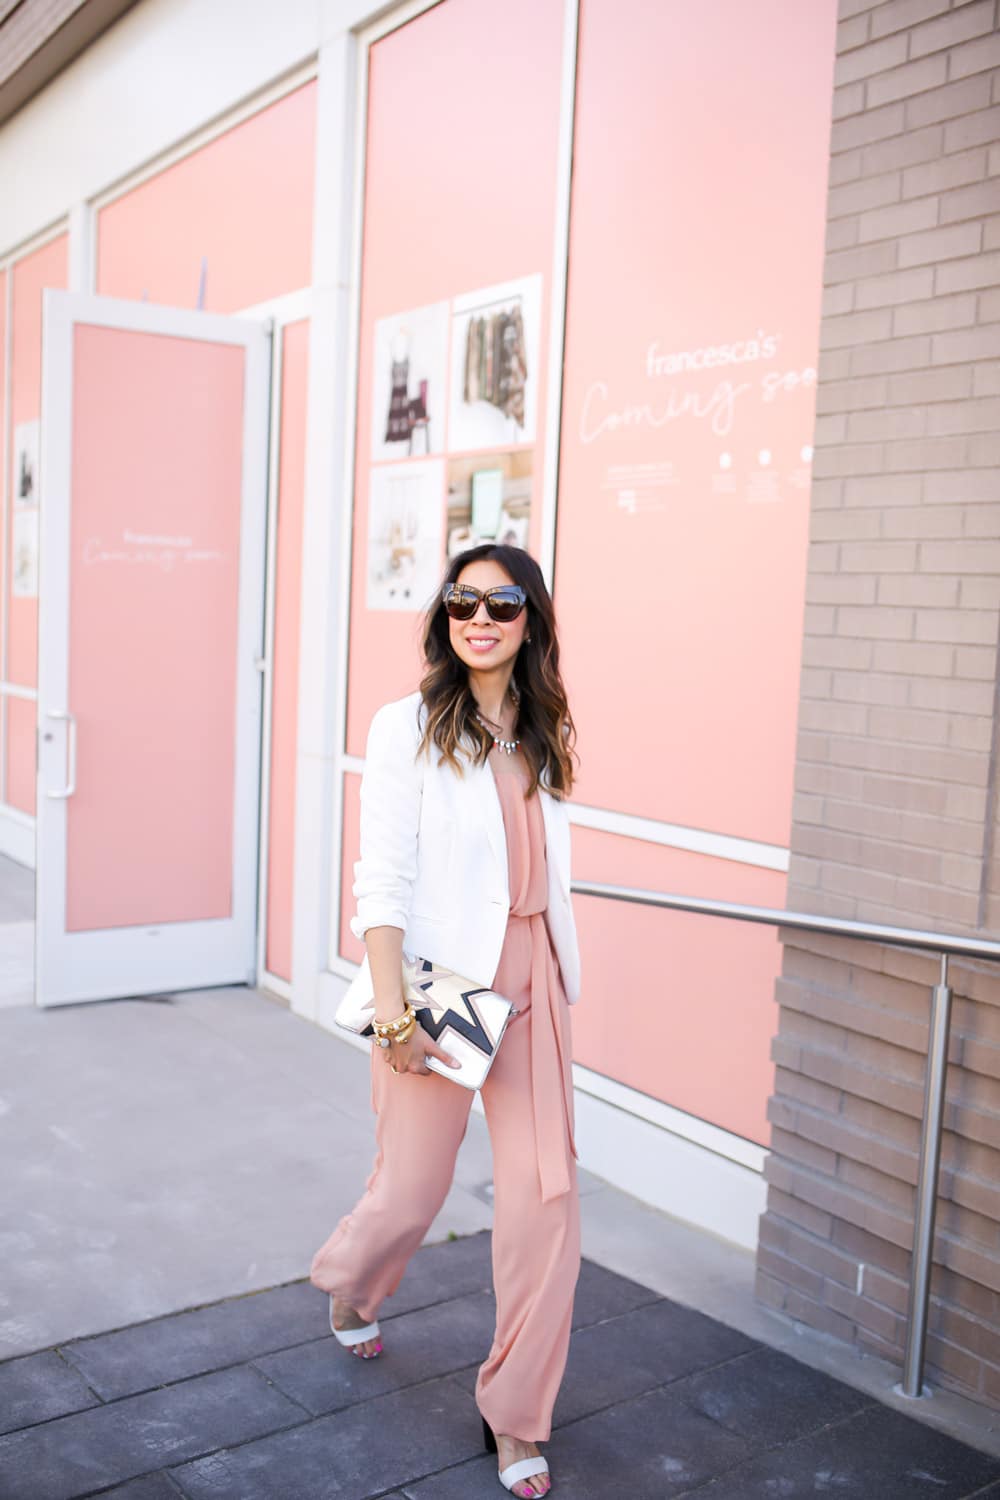 jcrew white blazer, pink jumsuit, miu miu star clutch, HOH chelsea sunglasses, style at any age